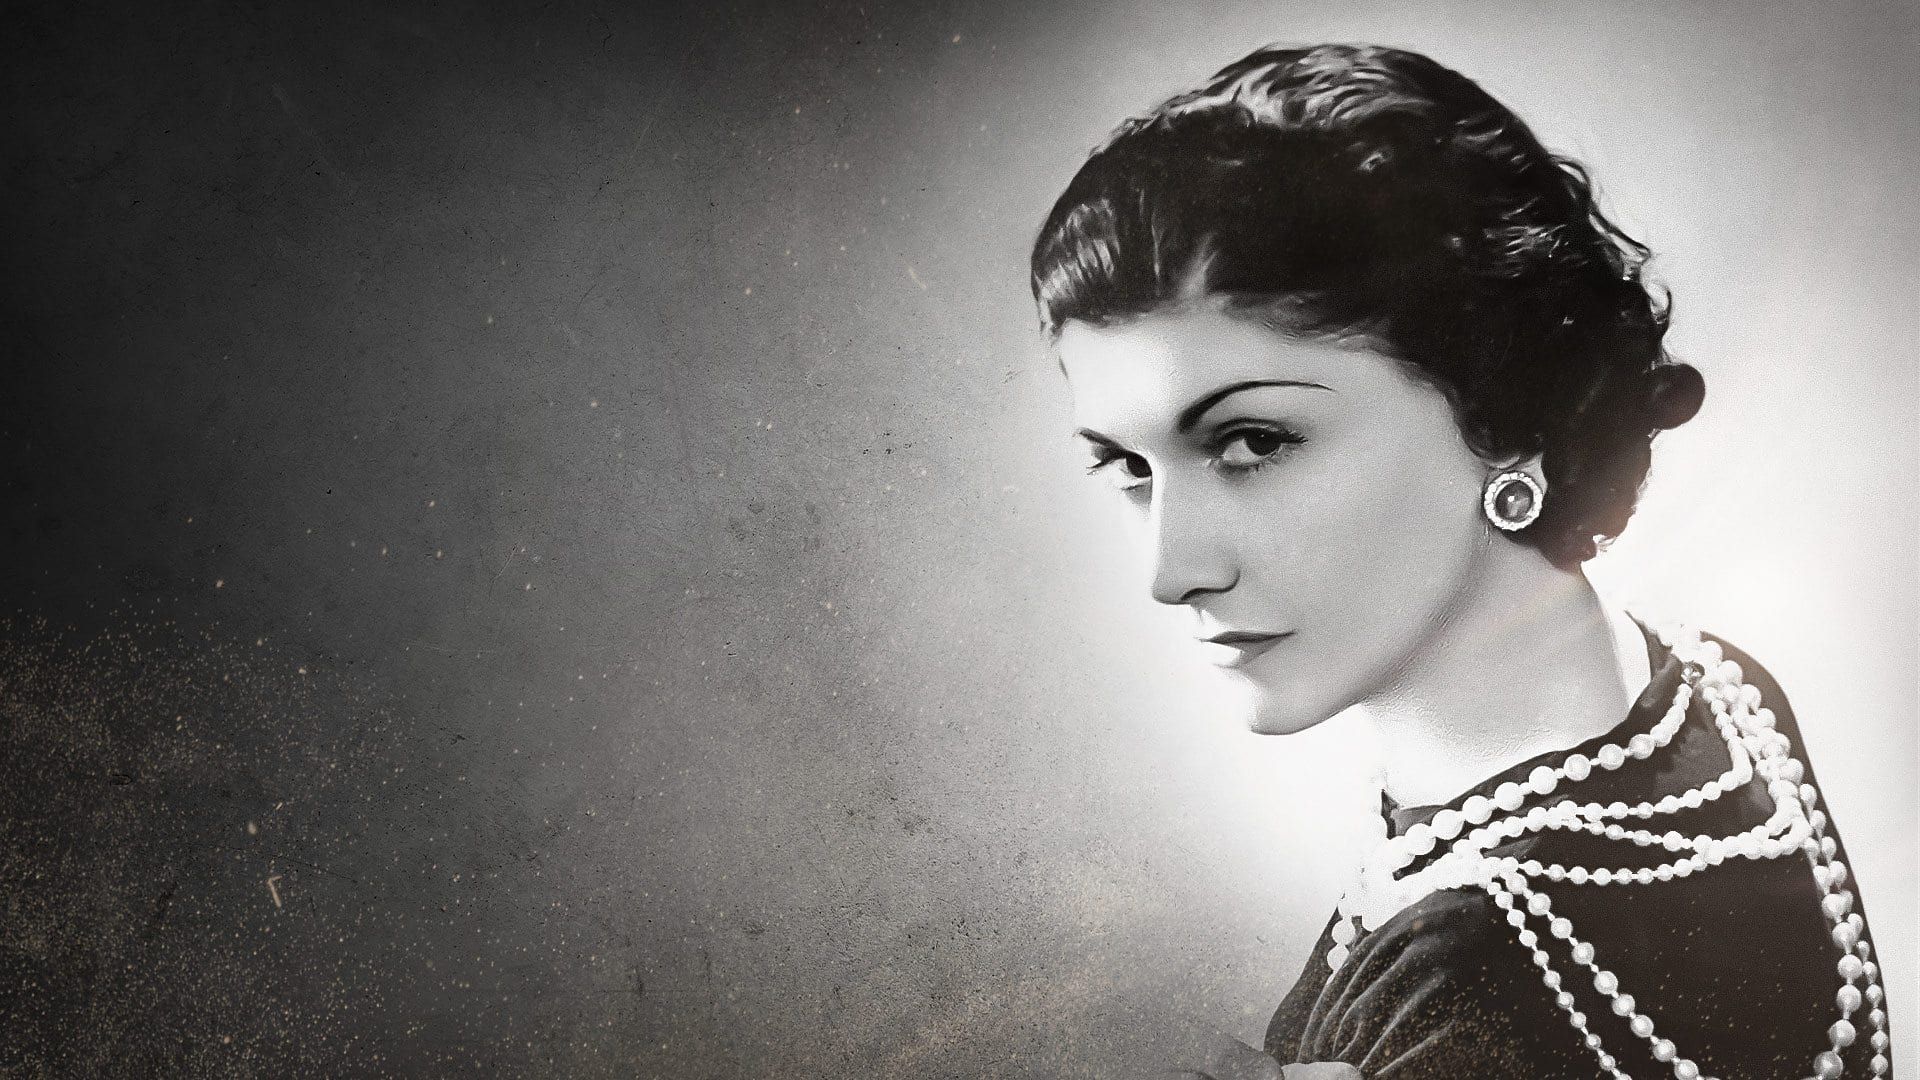 Coco Chanel Unbuttoned: Where to Watch and Stream Online